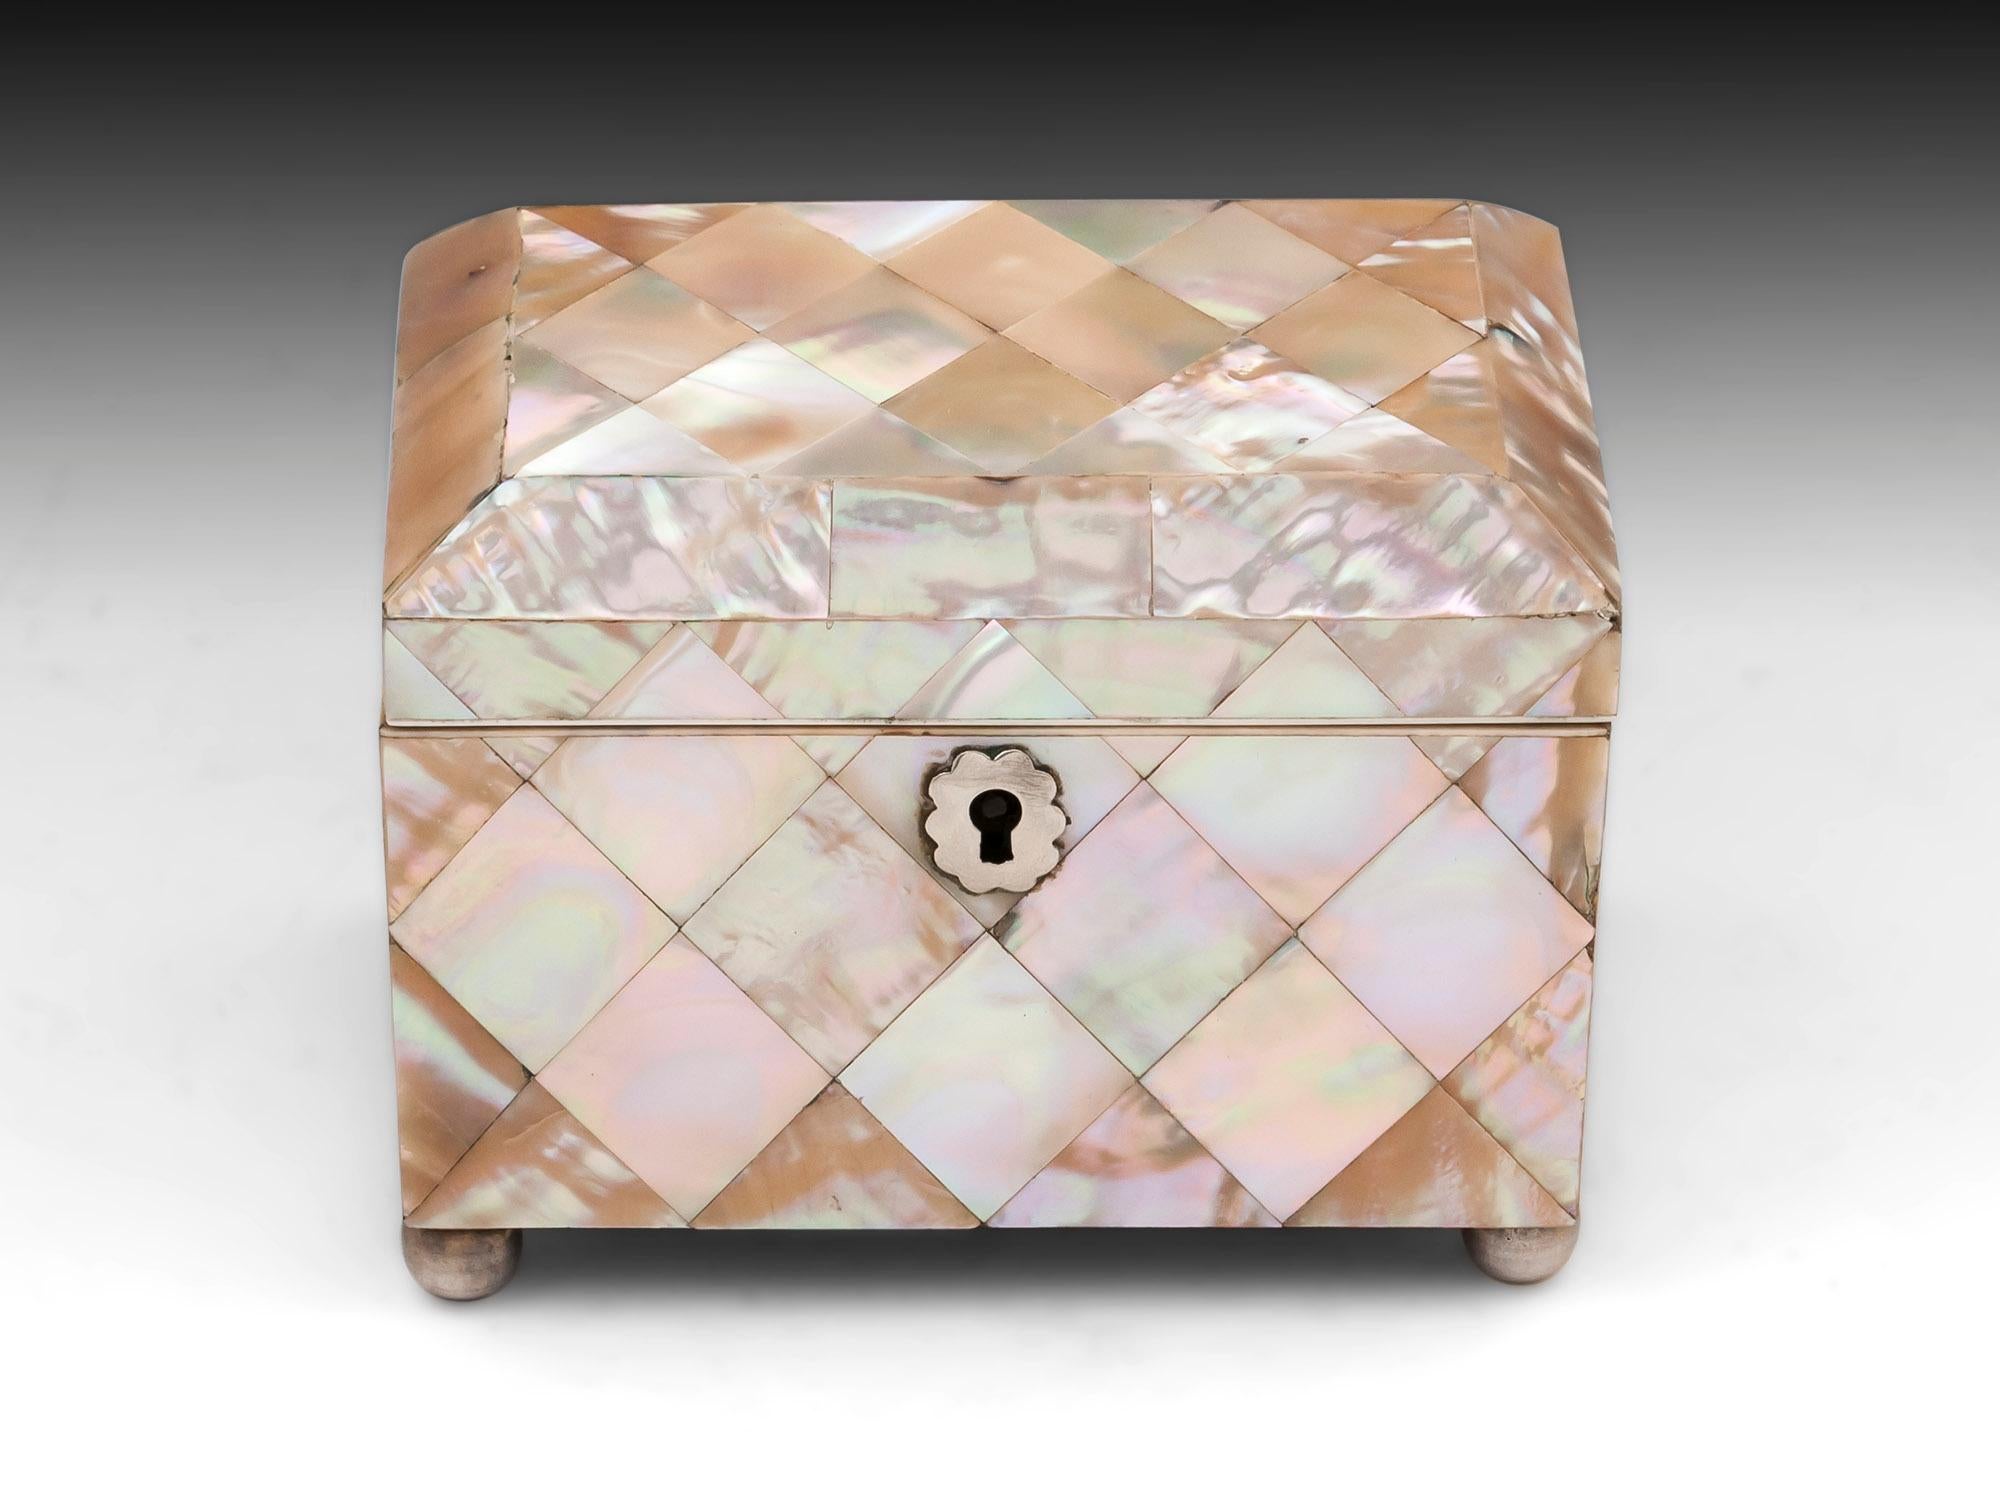 Antique mother-of-pearl tea caddy with a beautiful diamond shaped design with silver ornate shaped escutcheon and standing on four silvered ball feet.

The interior of this small antique mother-of-pearl tea caddy features two compartments with